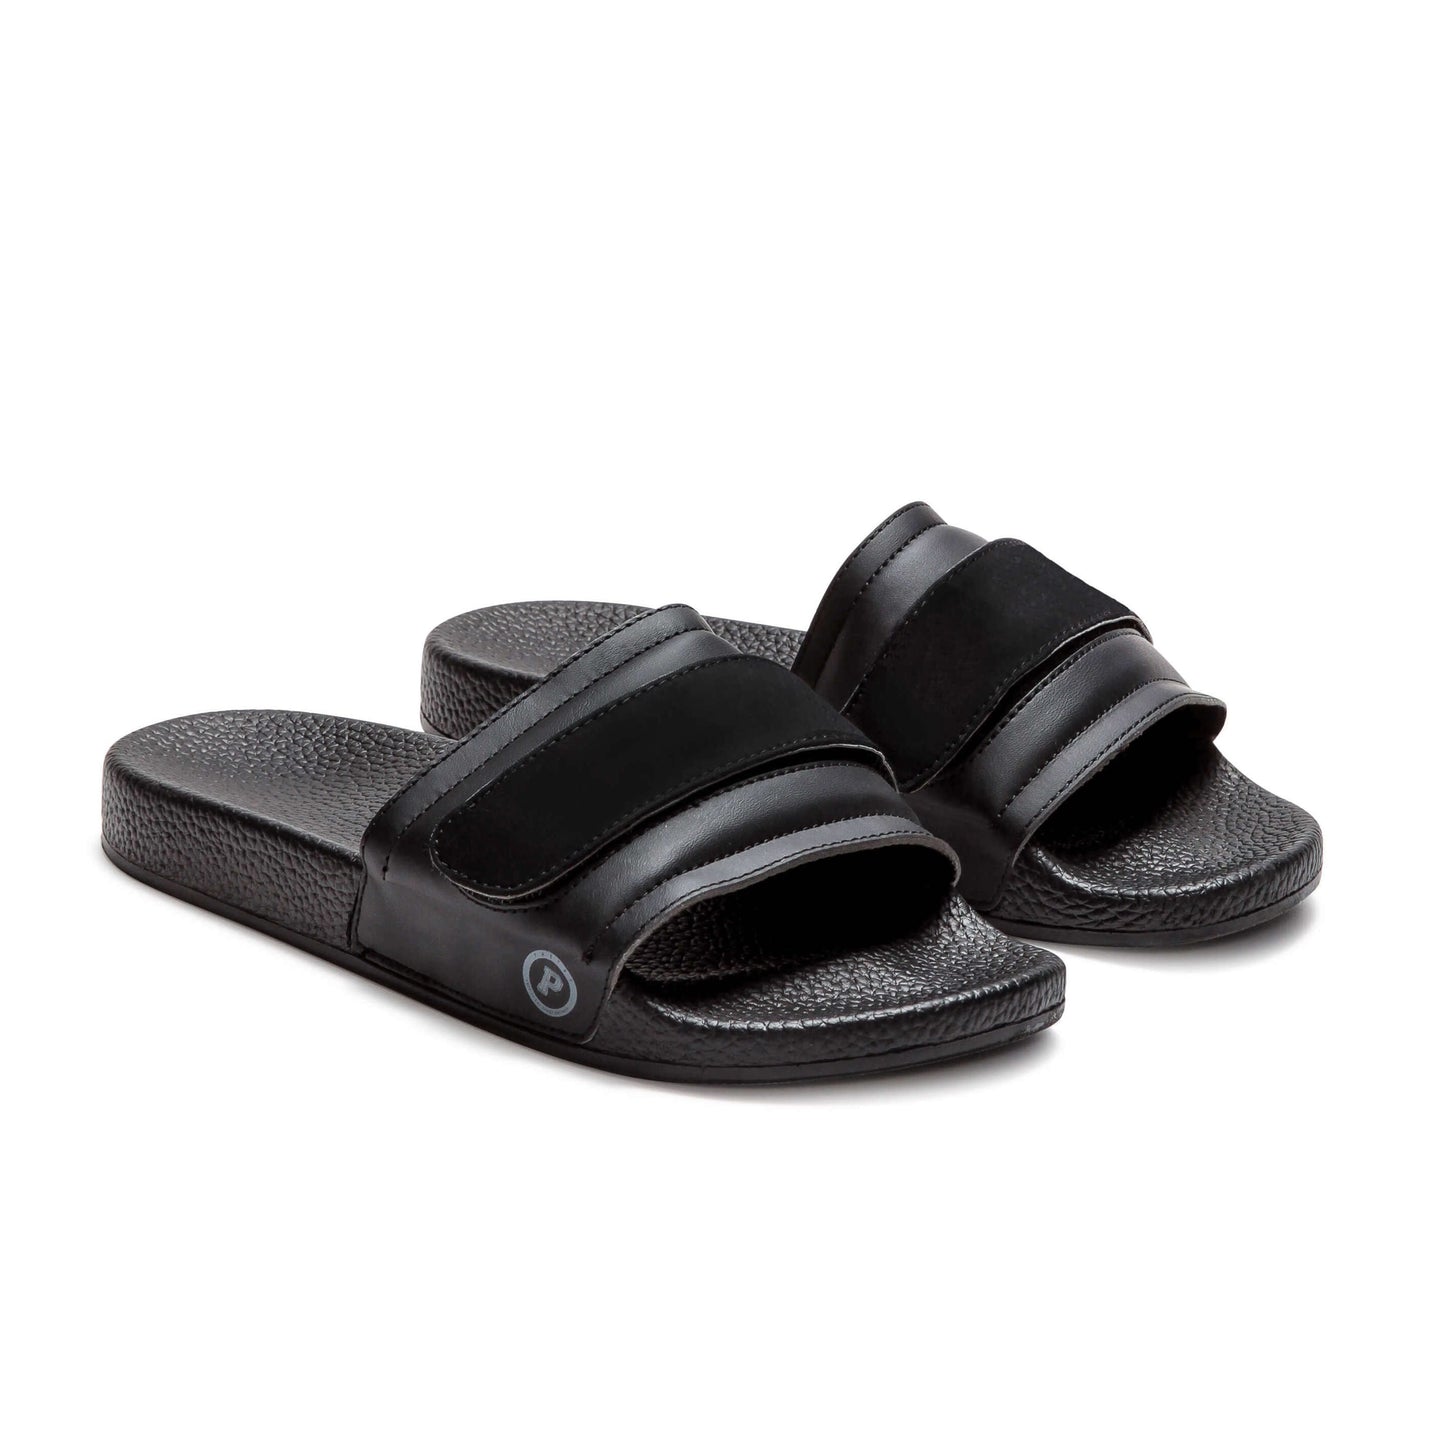 Pair of Pastry Adult Women's Recovery Slide in Black with Blank Straps